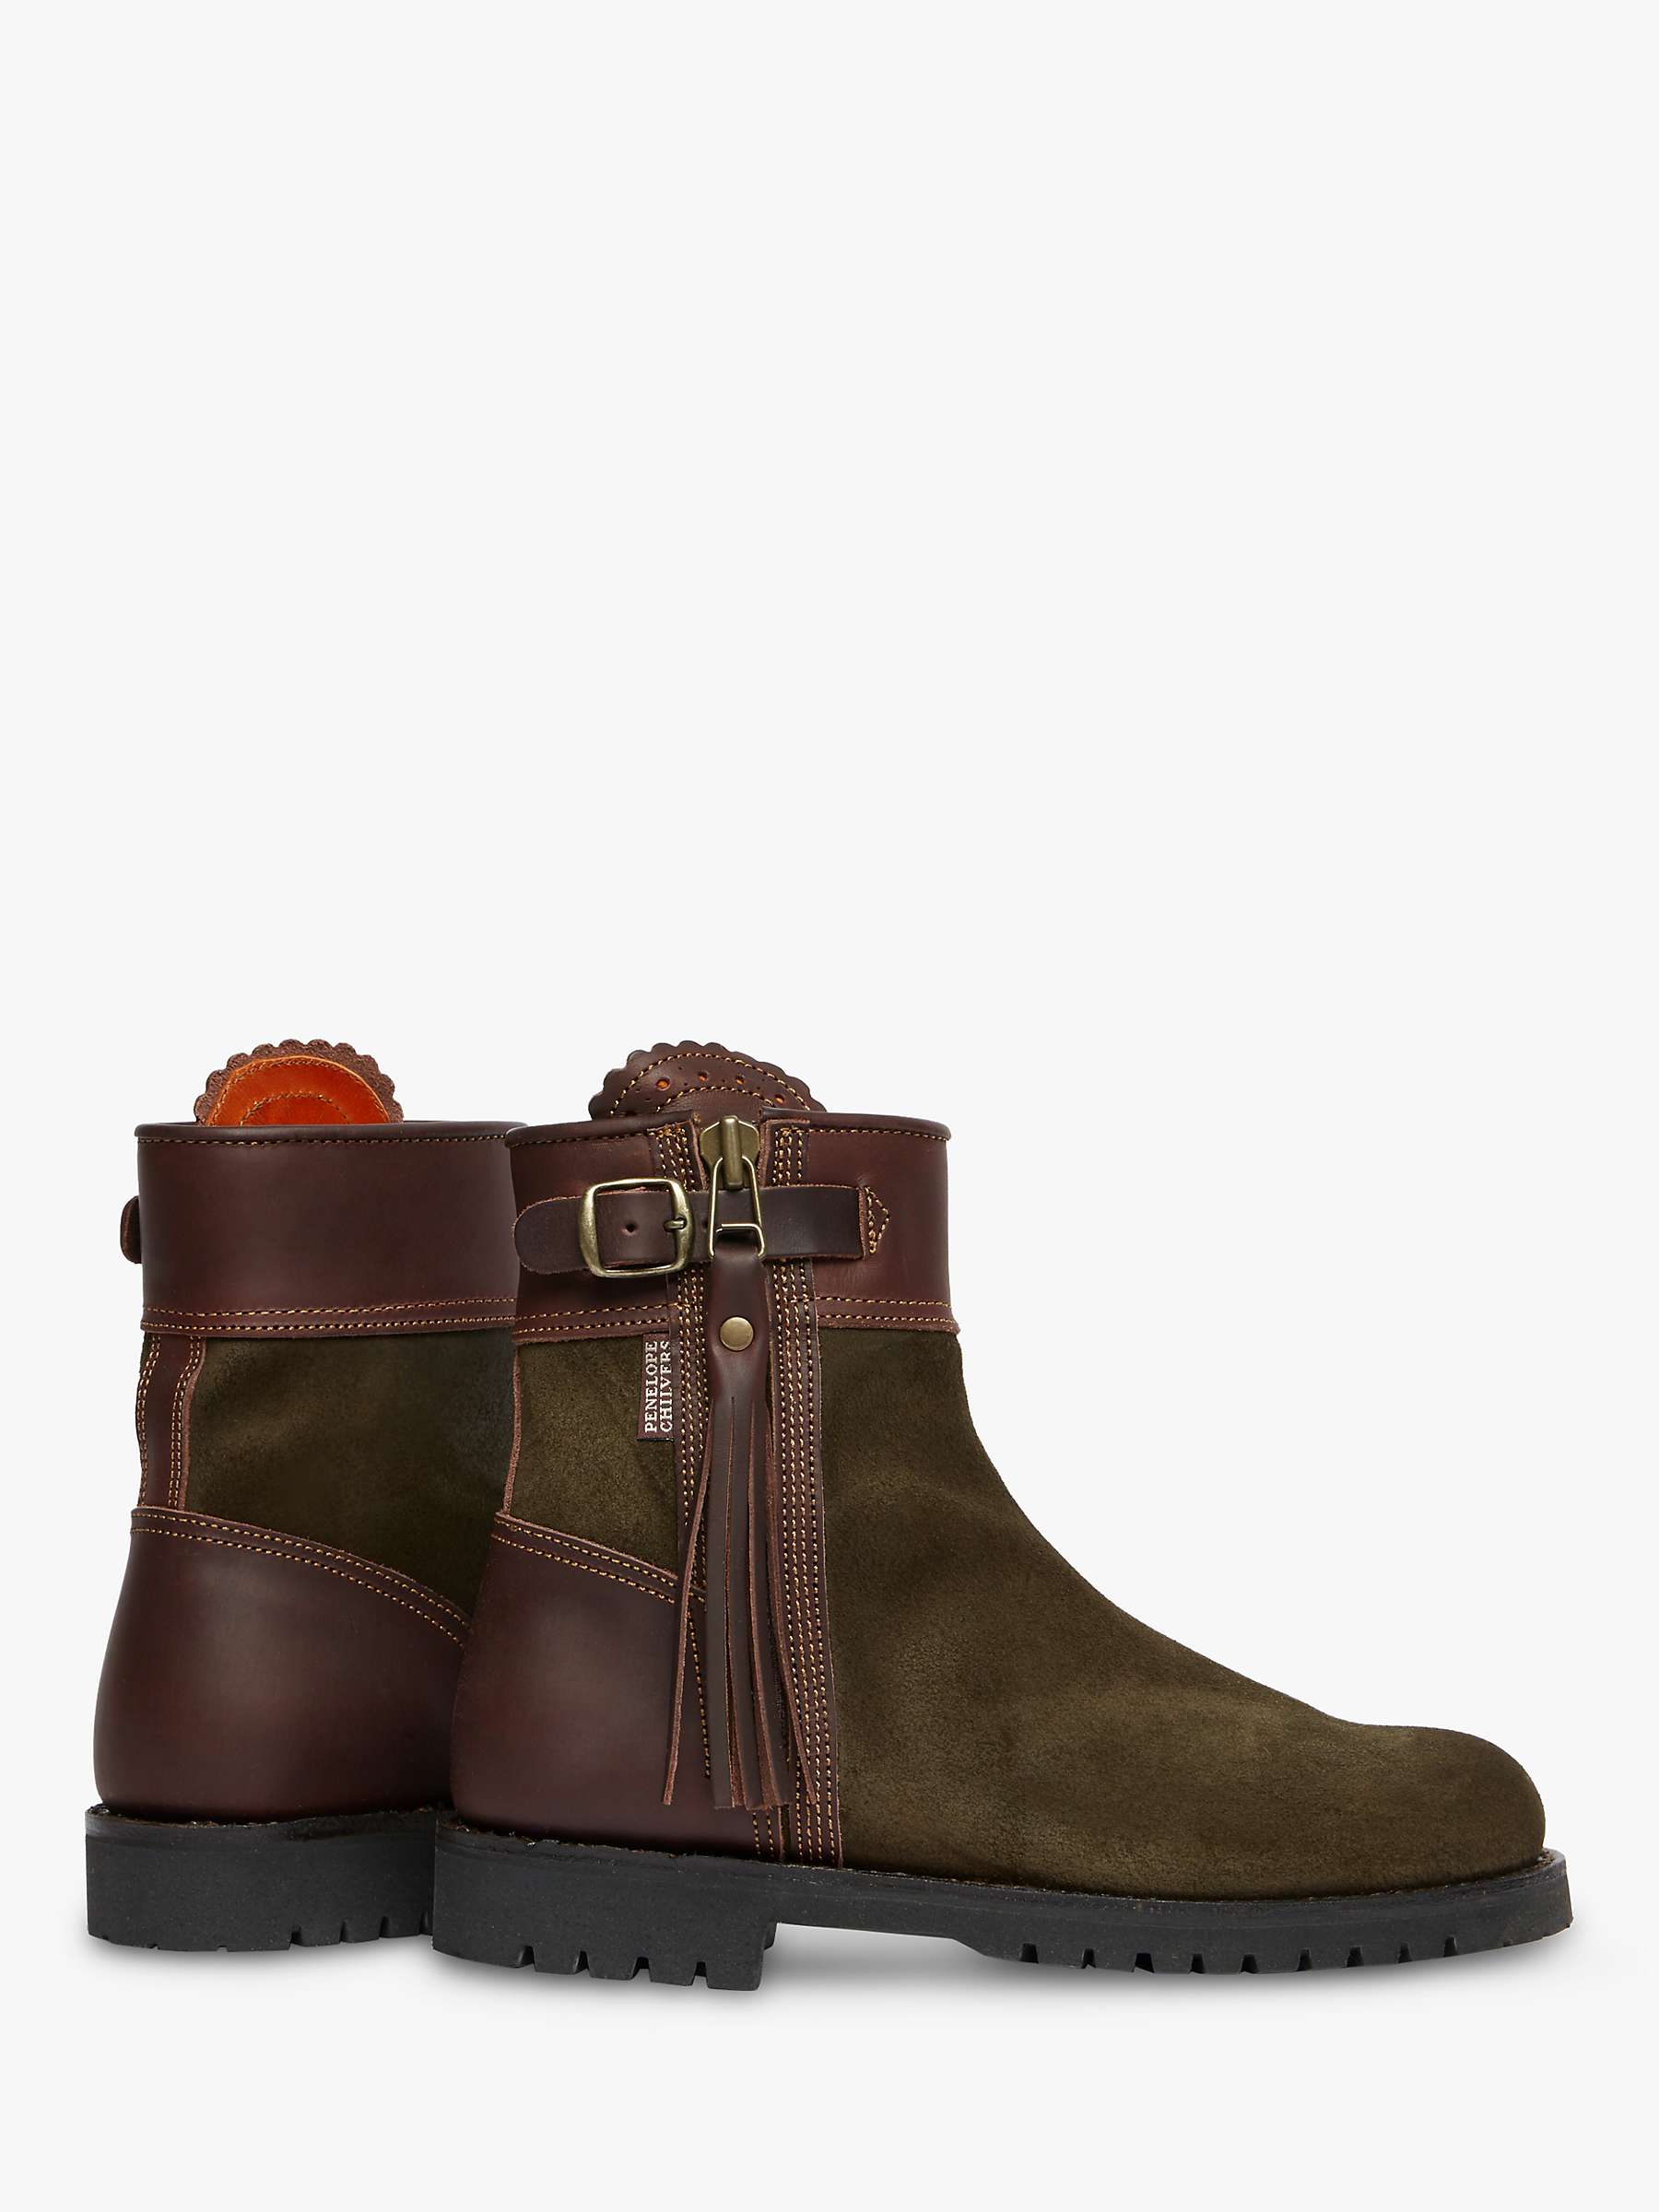 Buy Penelope Chilvers Suede Inclement Cropped Tassel Boots, Seaweed/Conker Online at johnlewis.com